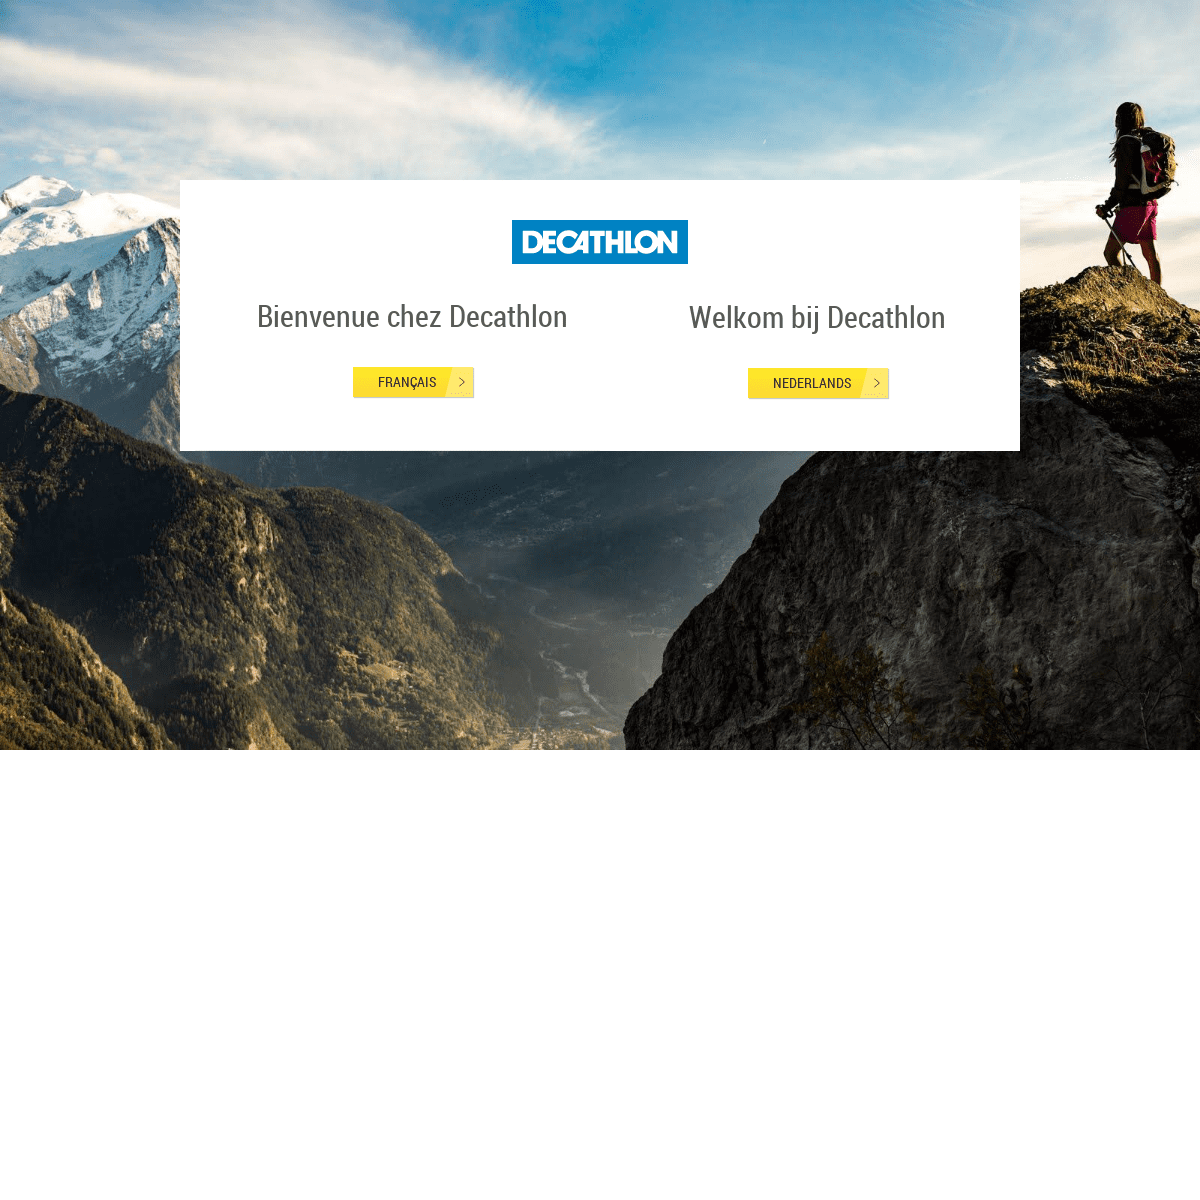 A complete backup of https://decathlon.be